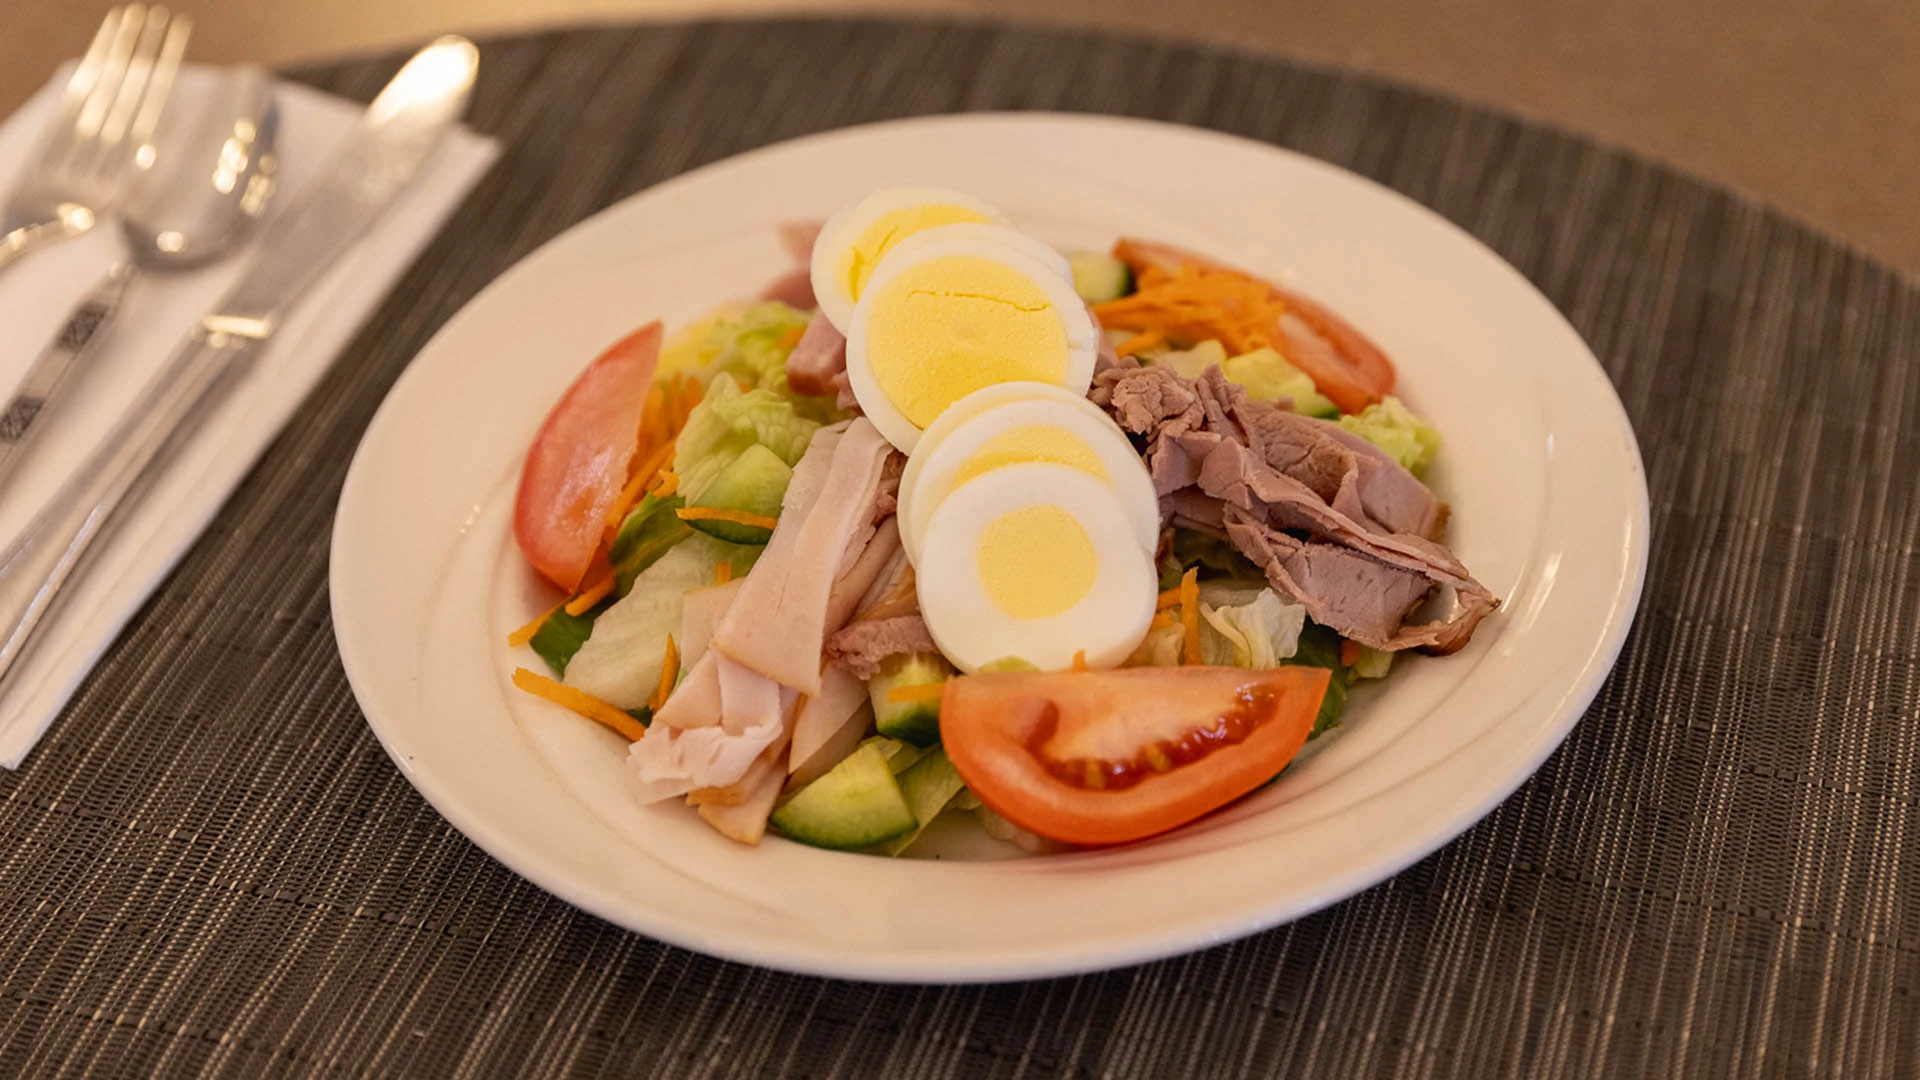 Green salad with hardboiled egg and sandwich meat on top